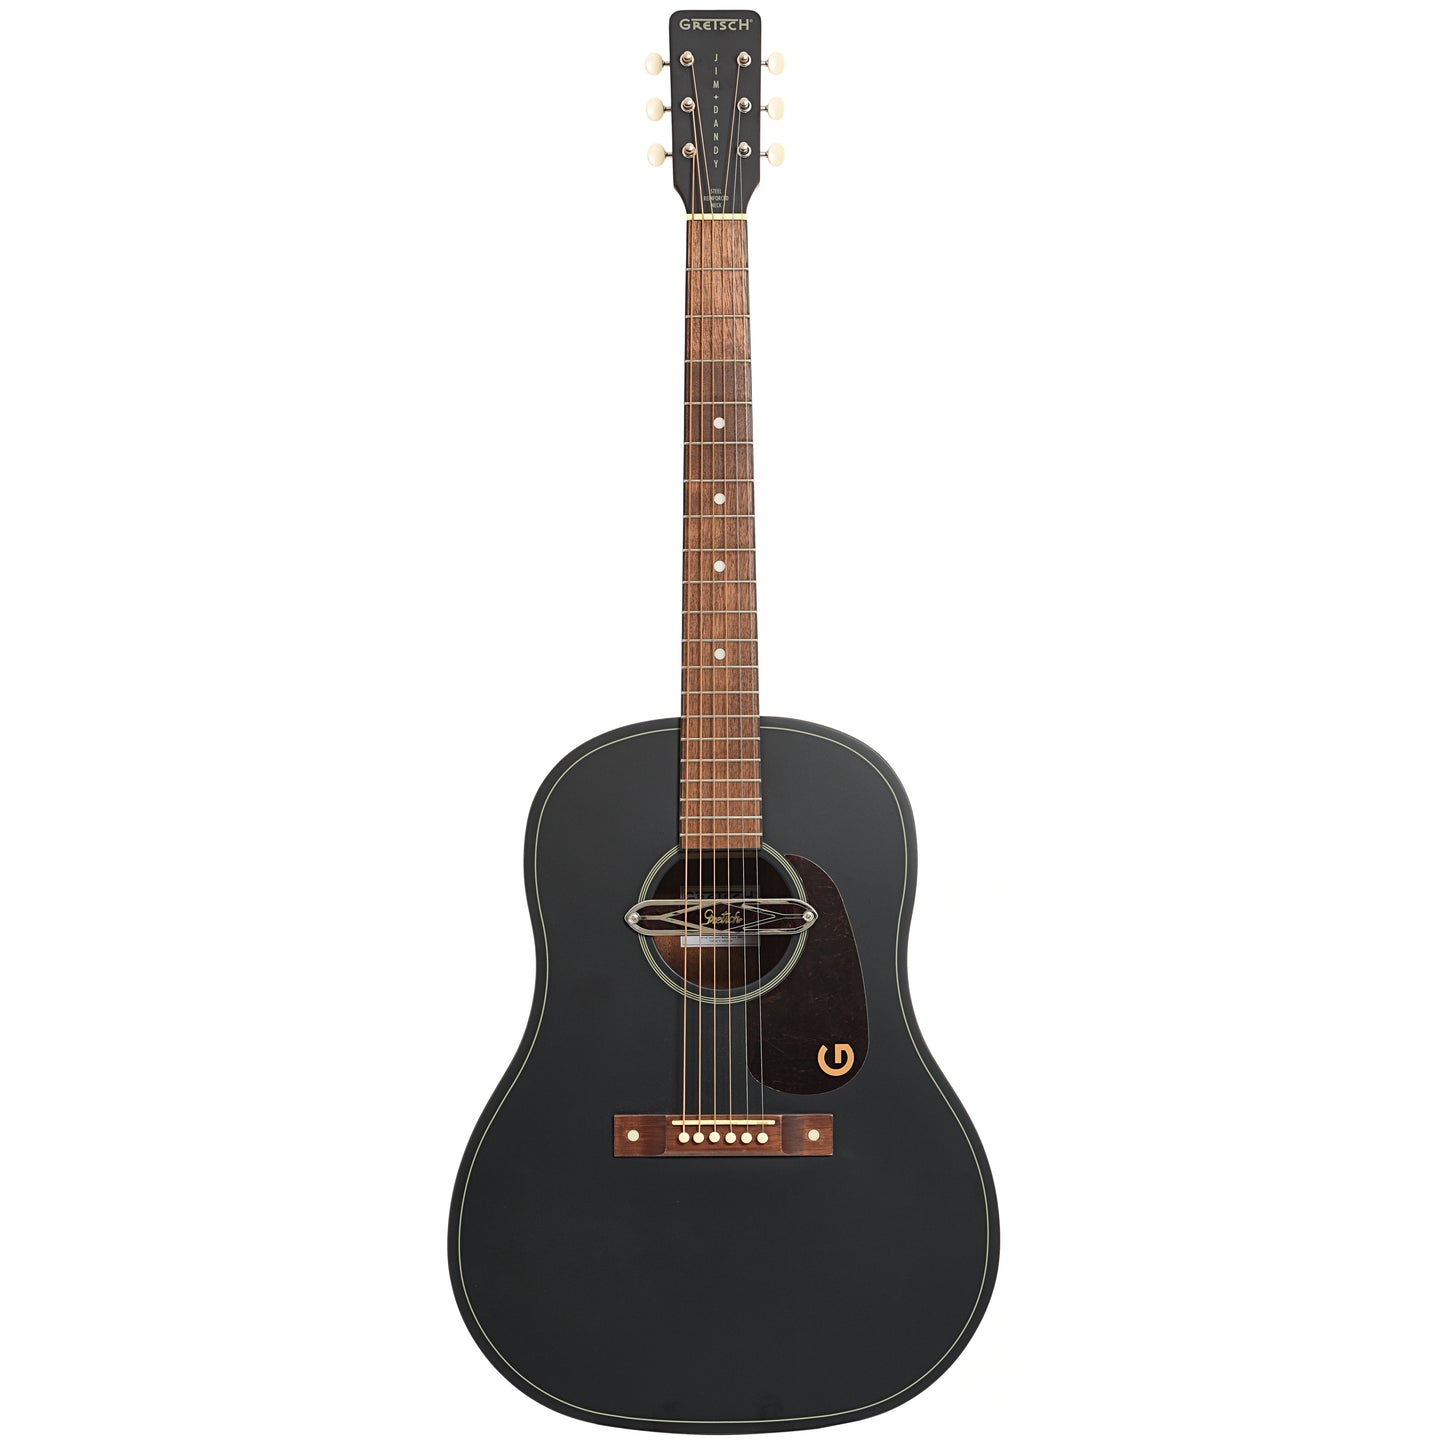 Full front of Gretsch Jim Dandy Deltoluxe Dreadnought Acoustic/Electric Guitar, Black Top